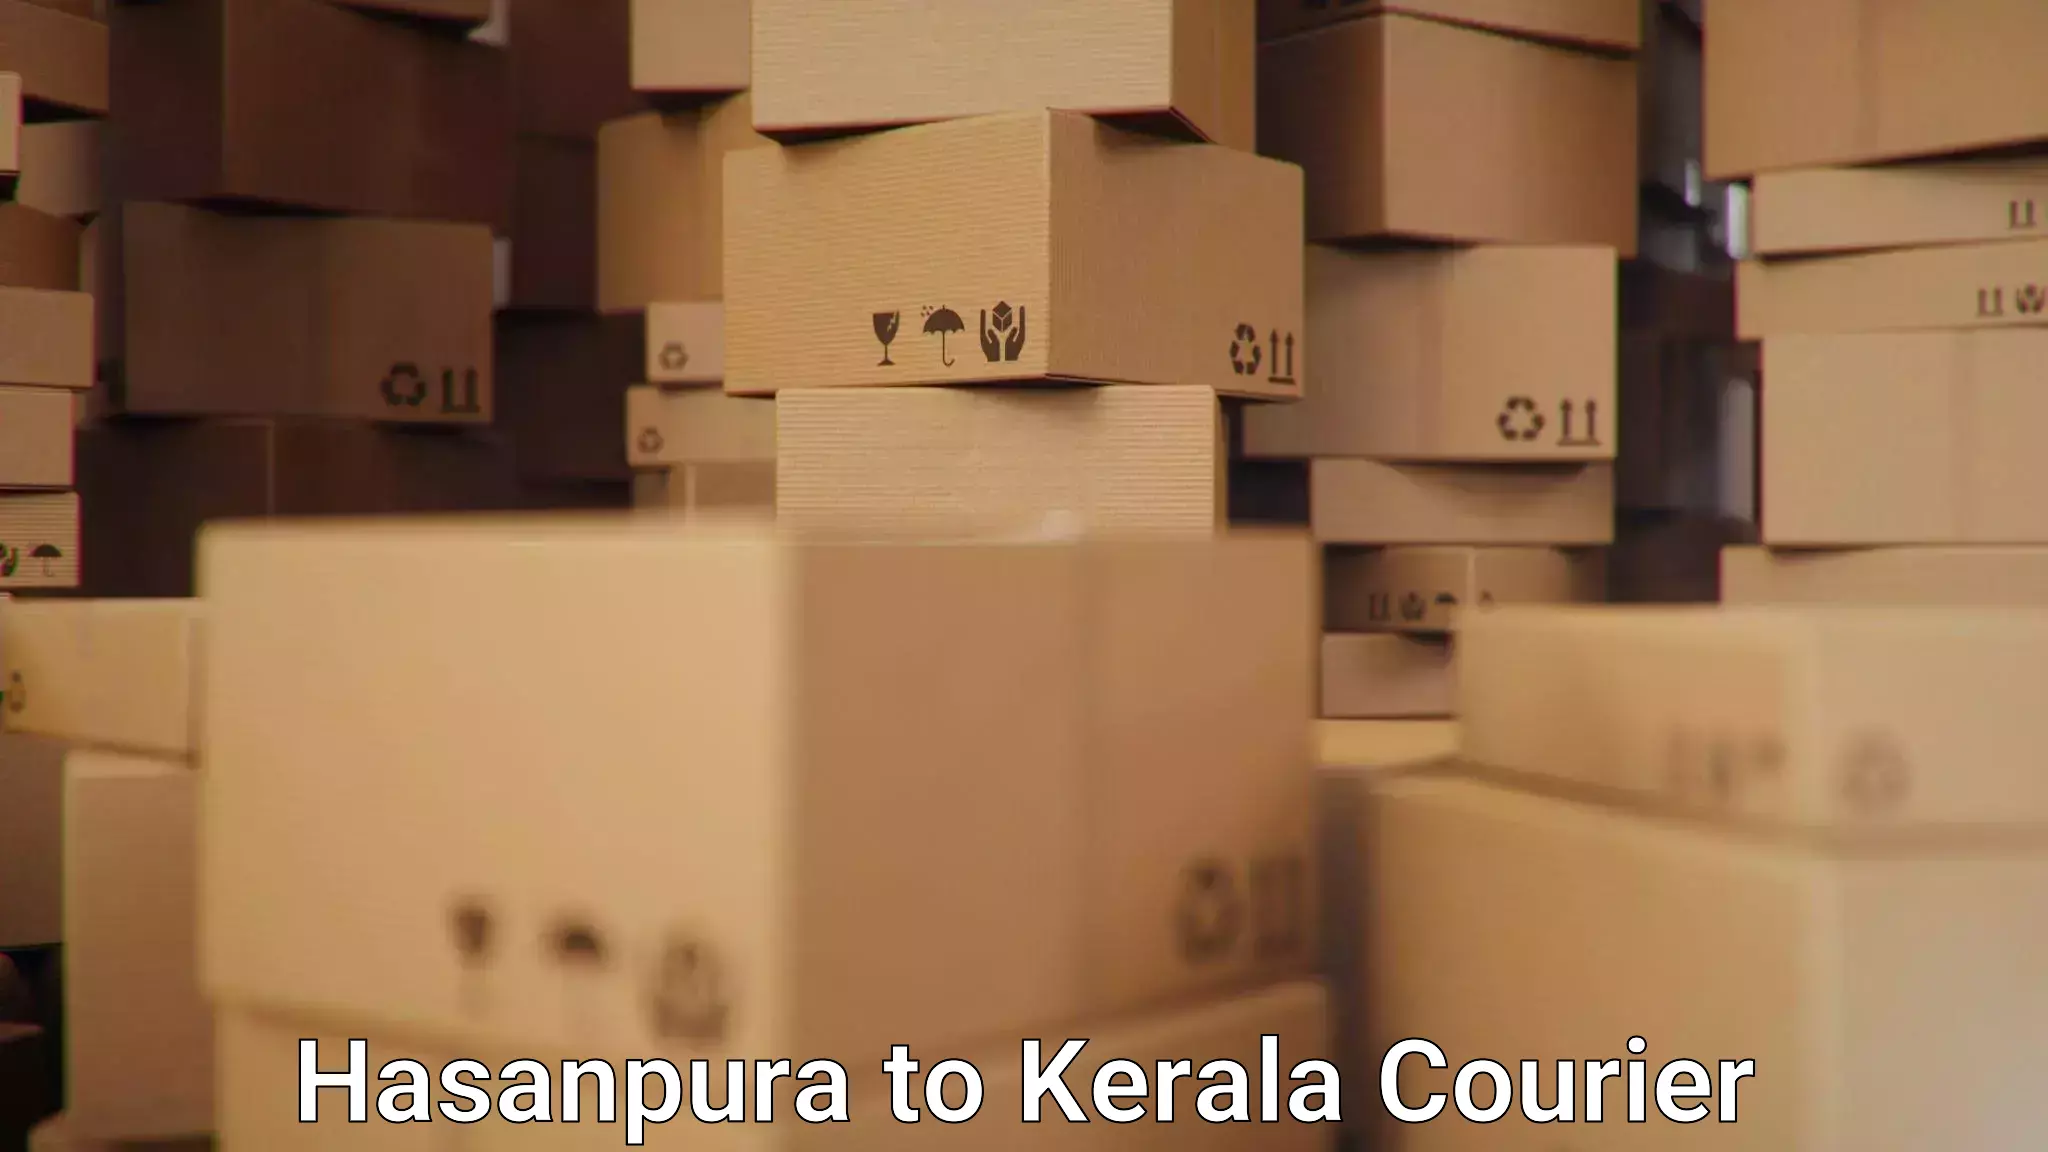 Global courier networks Hasanpura to Kottayam